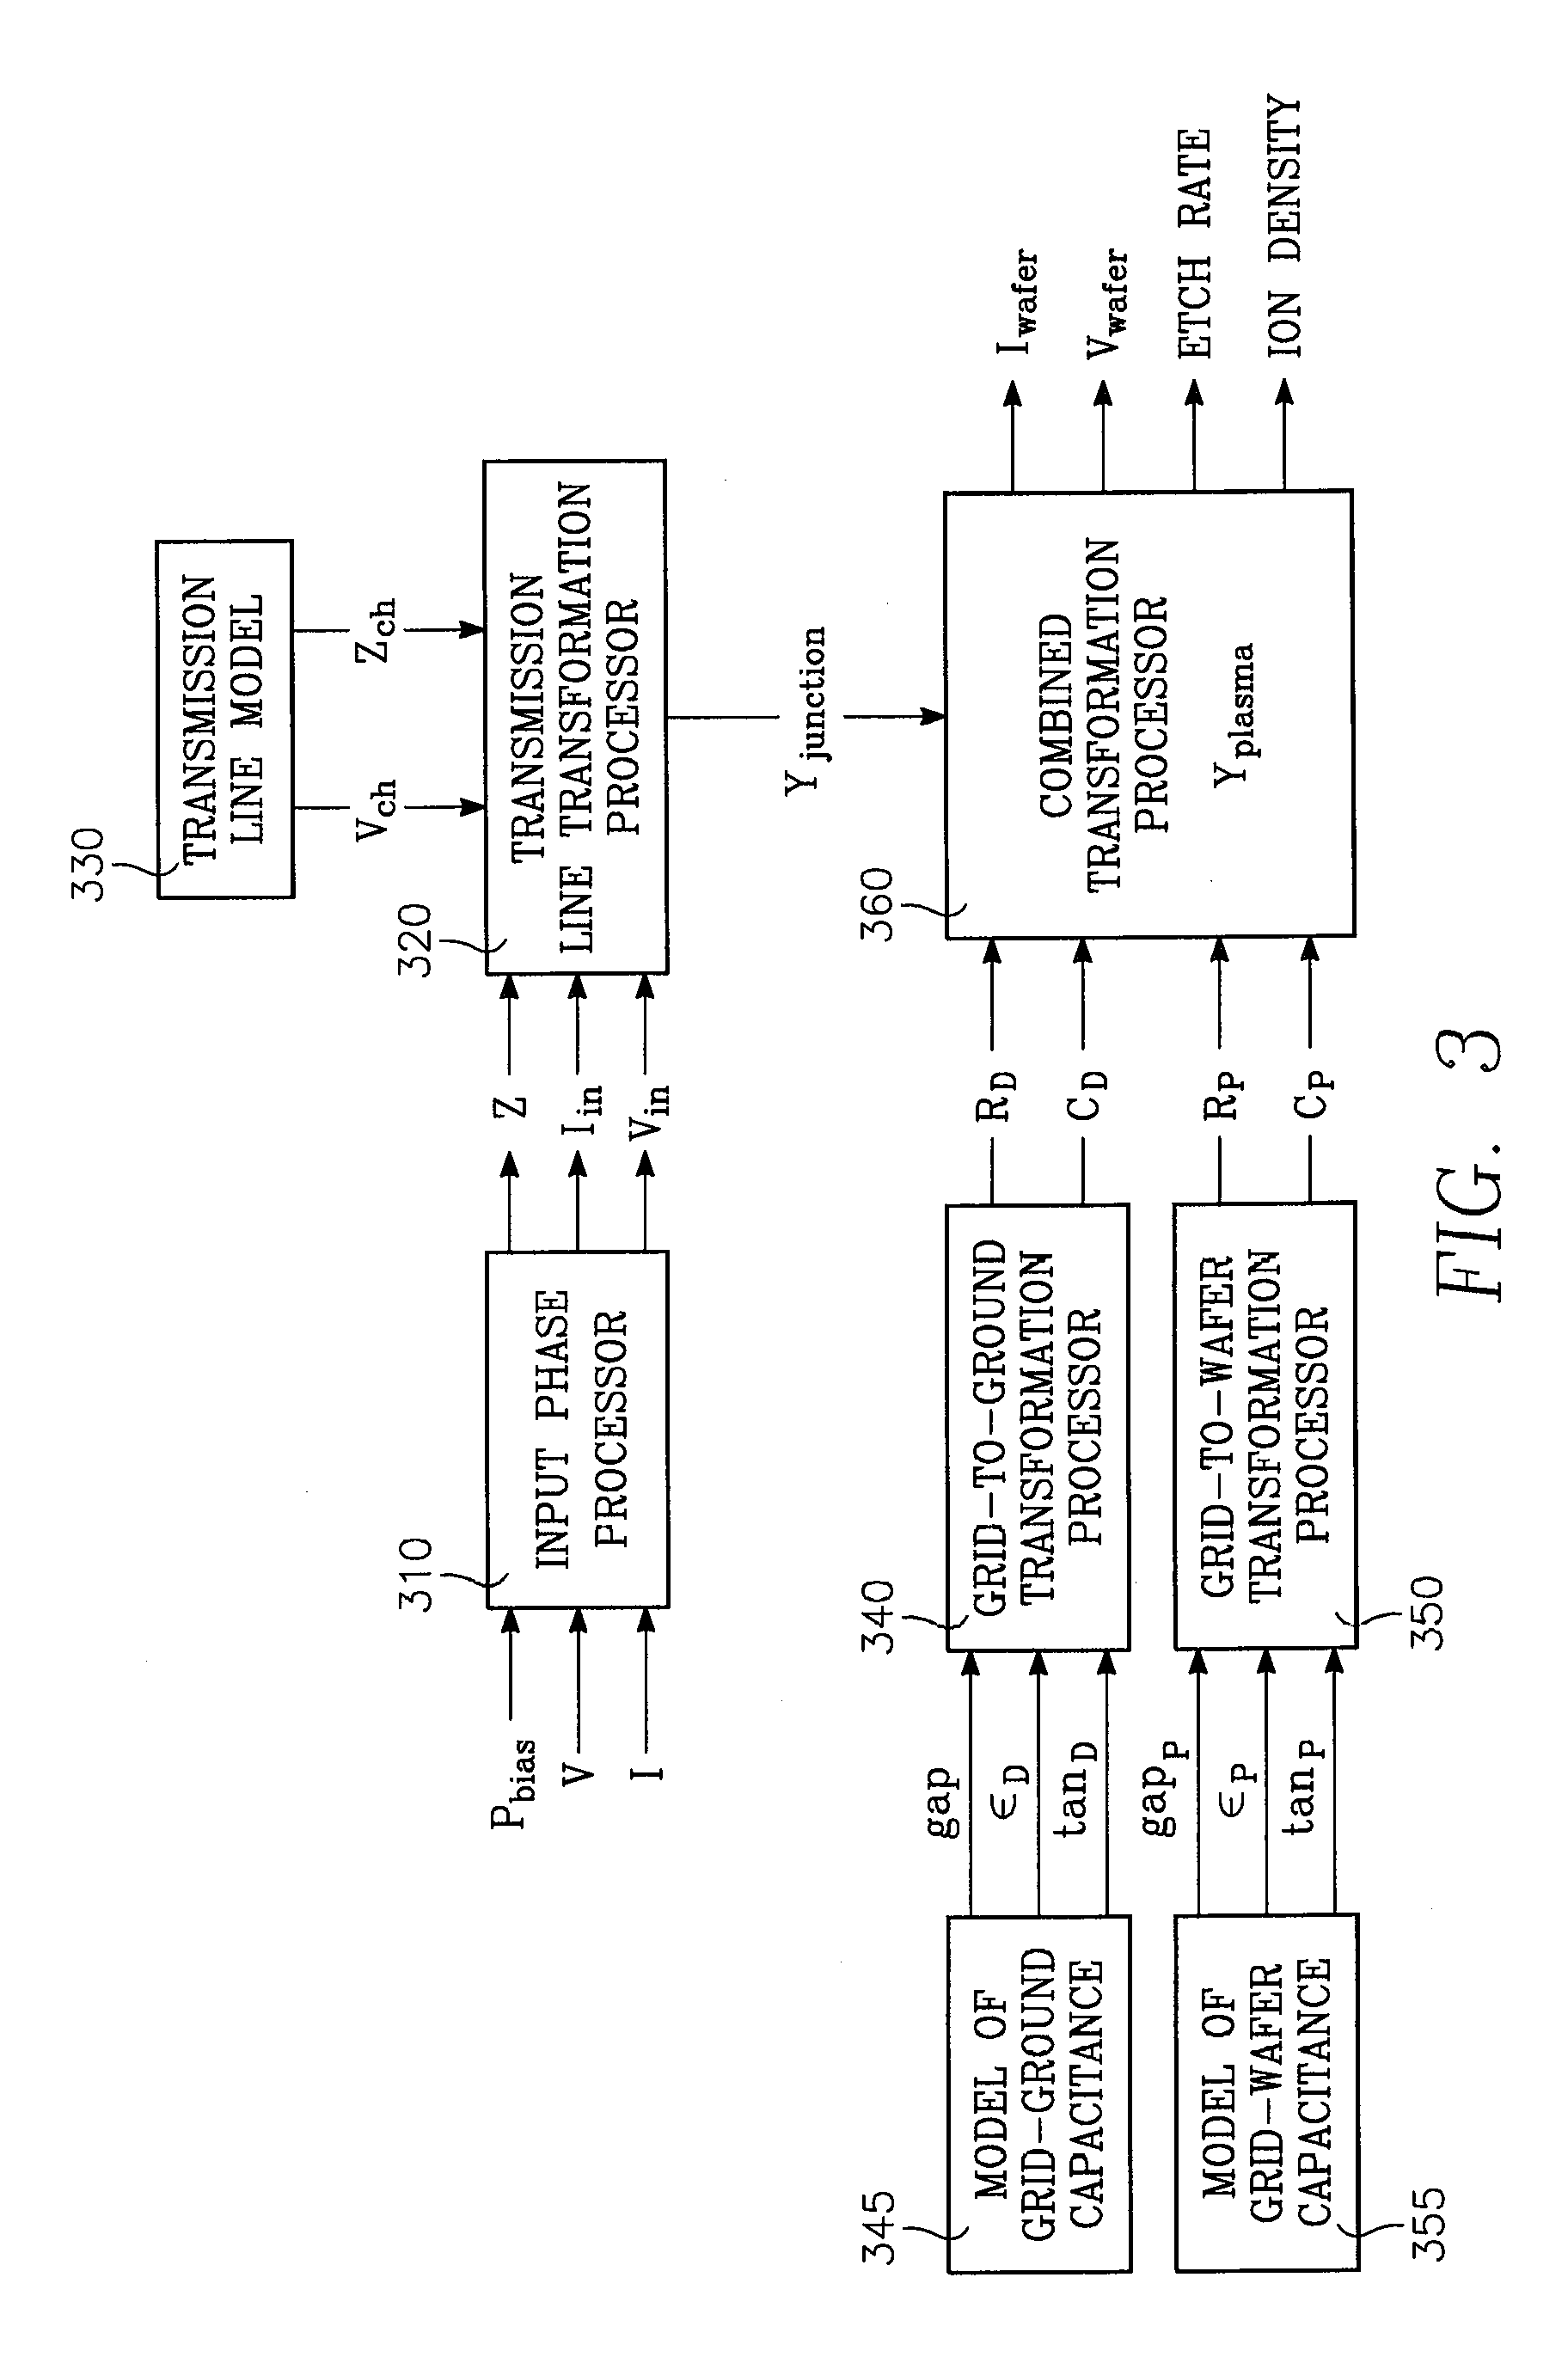 Method of controlling a chamber based upon predetermined concurrent behavoir of selected plasma parameters as a function of selected chamber paramenters